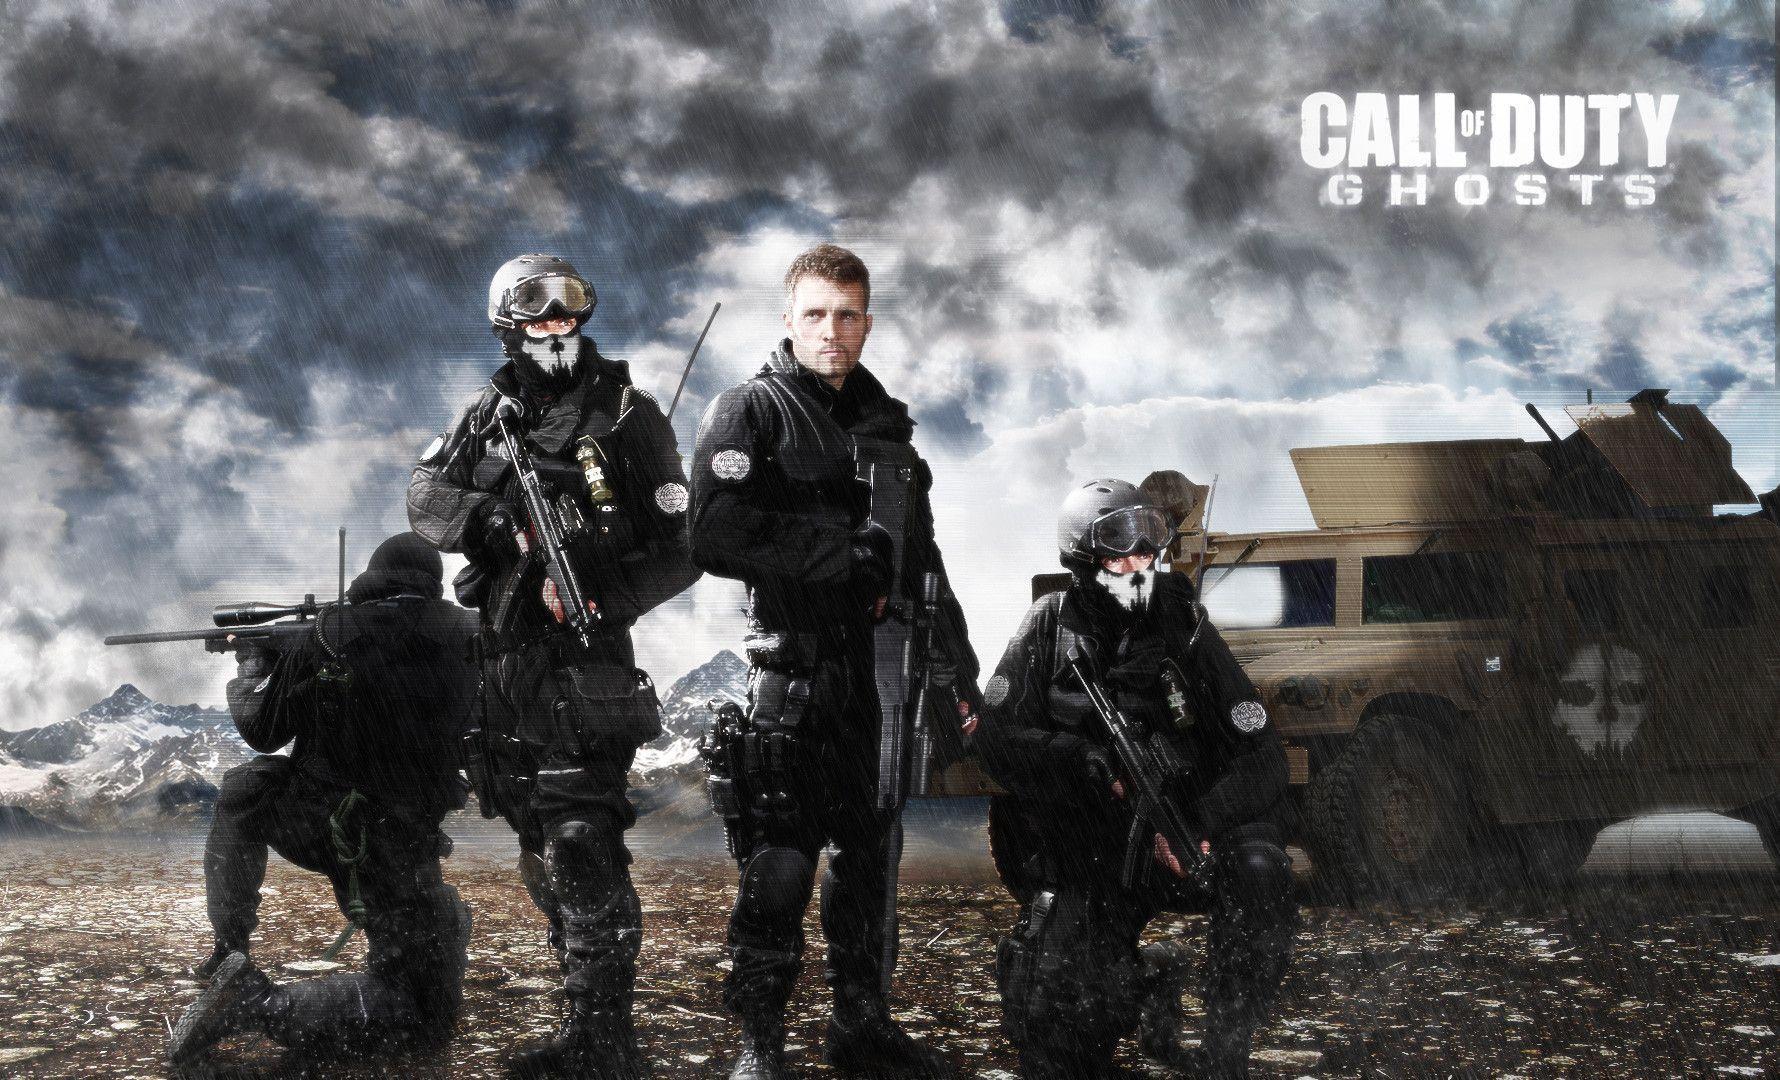 Call of Duty Ghosts Wallpaper HD